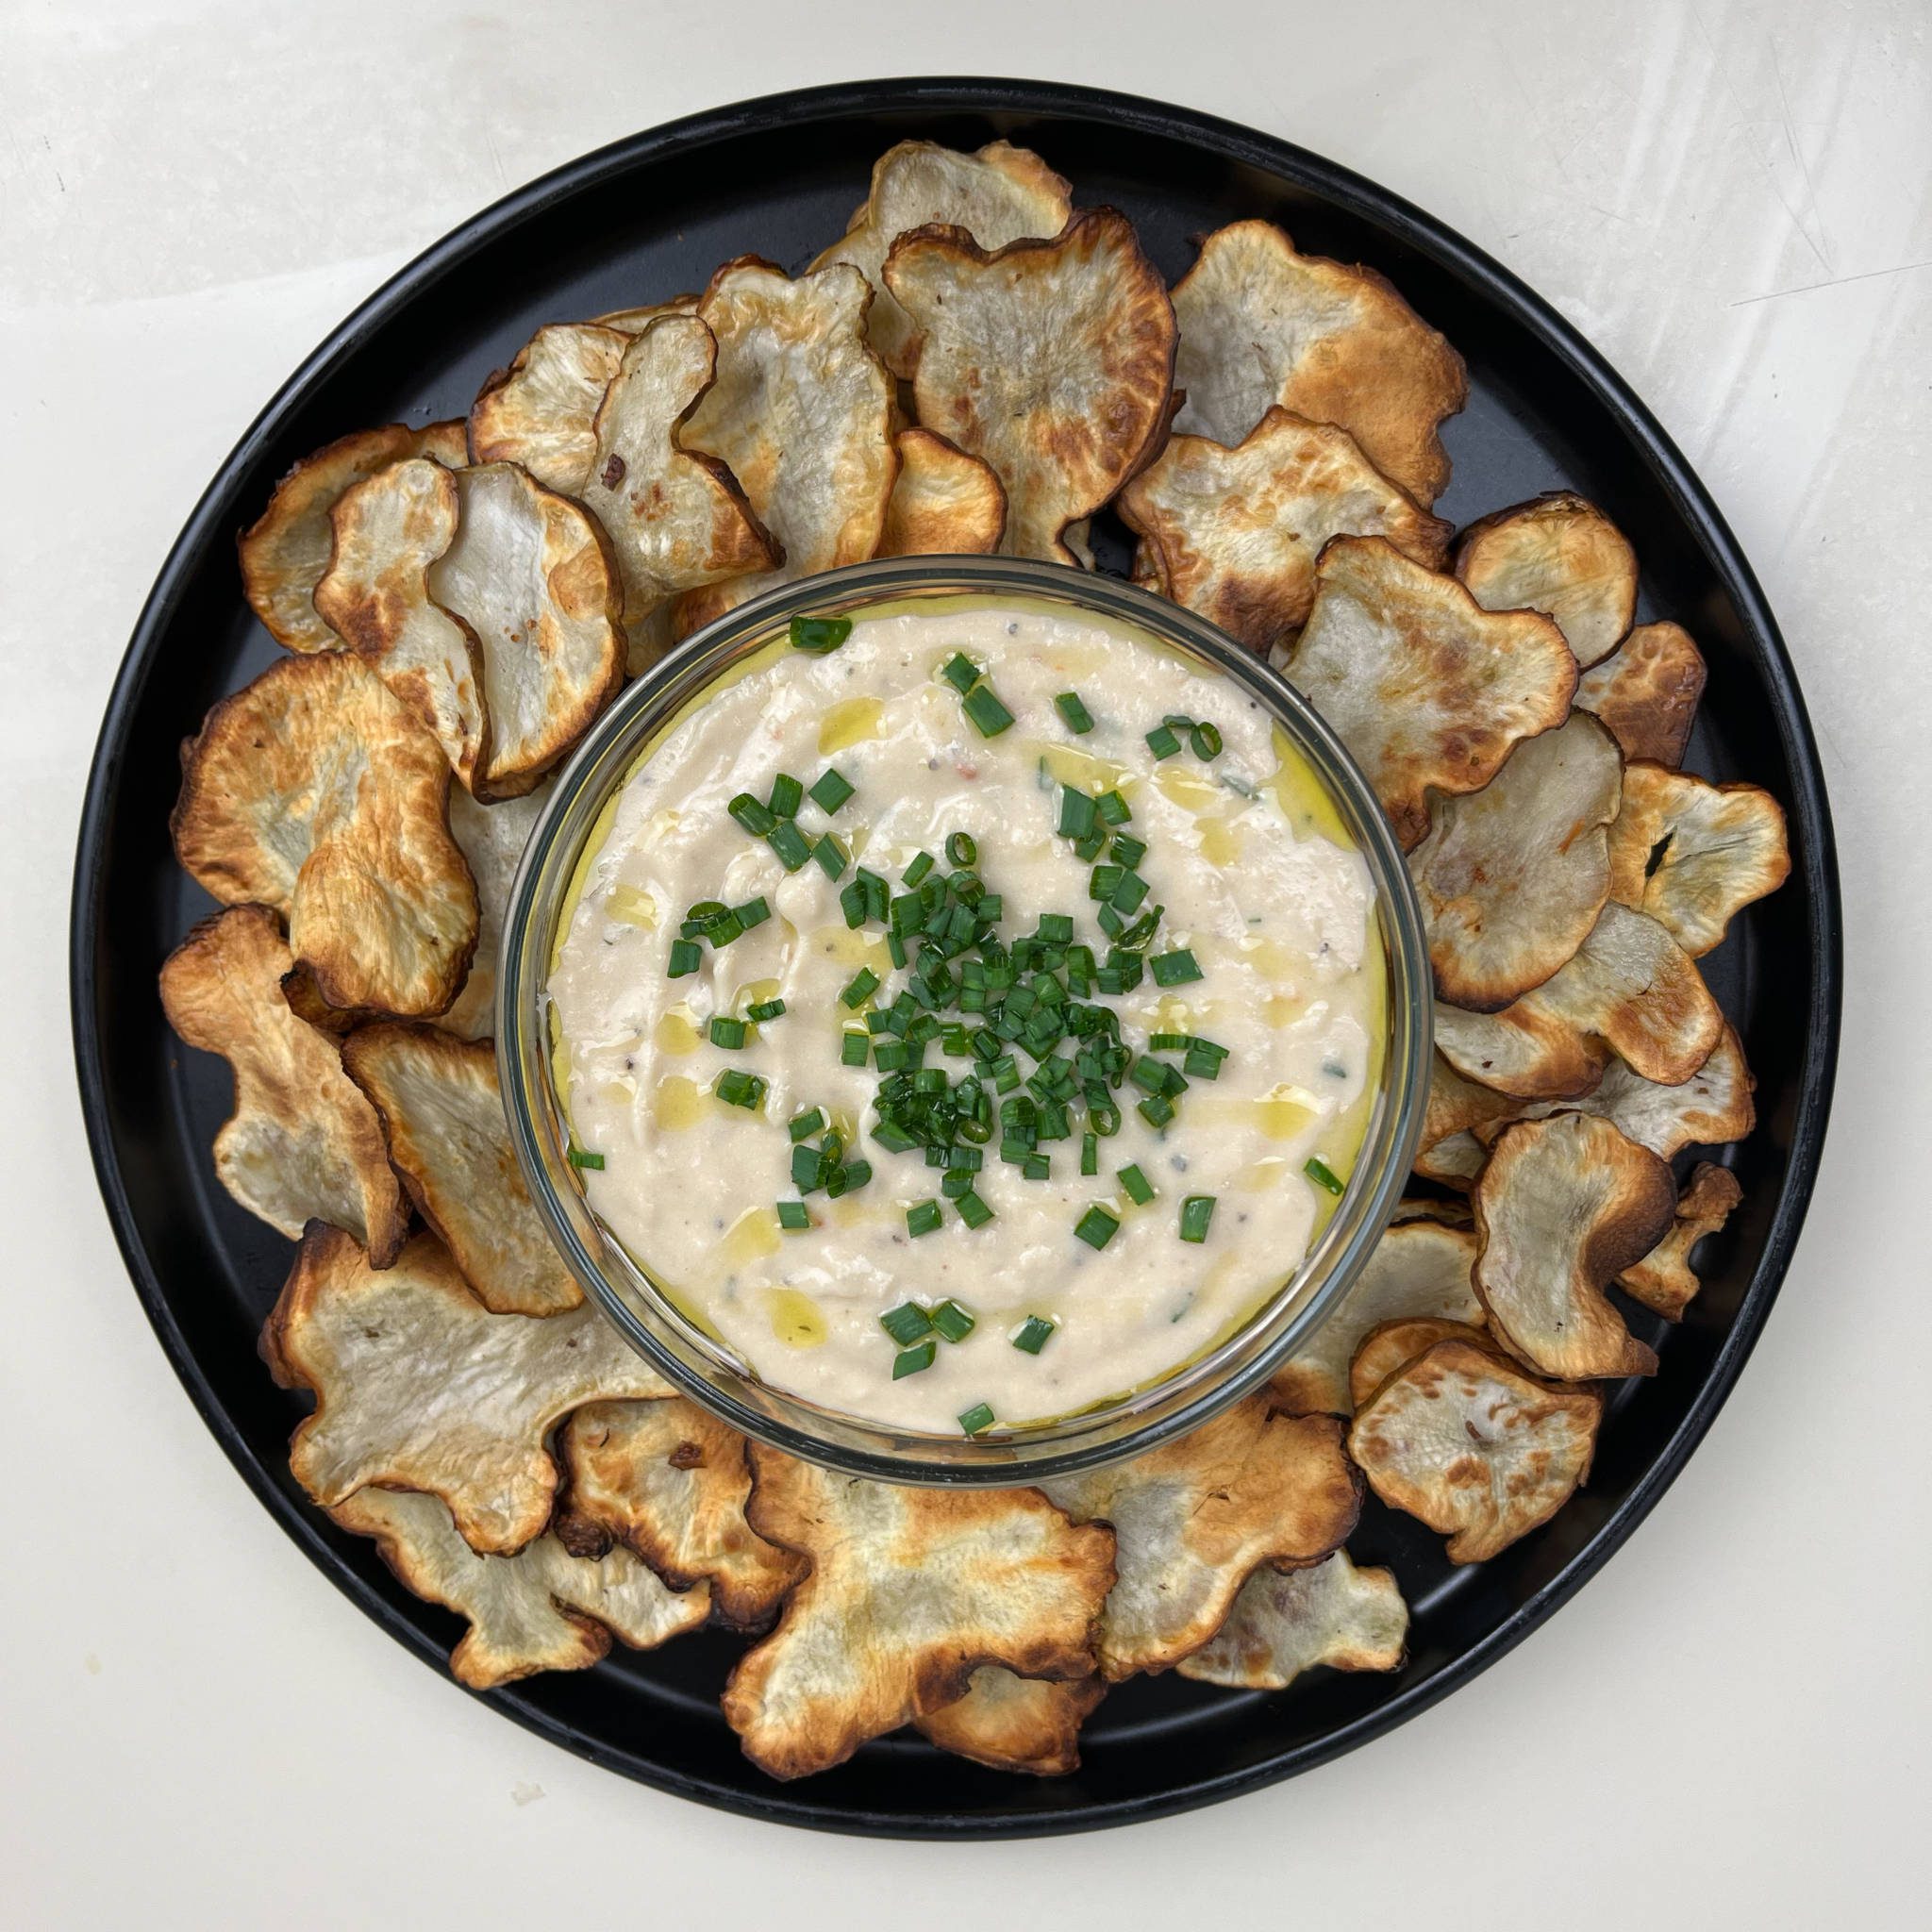 Bowl of rosemary and roasted garlic dip surrounded by sunchoke chips